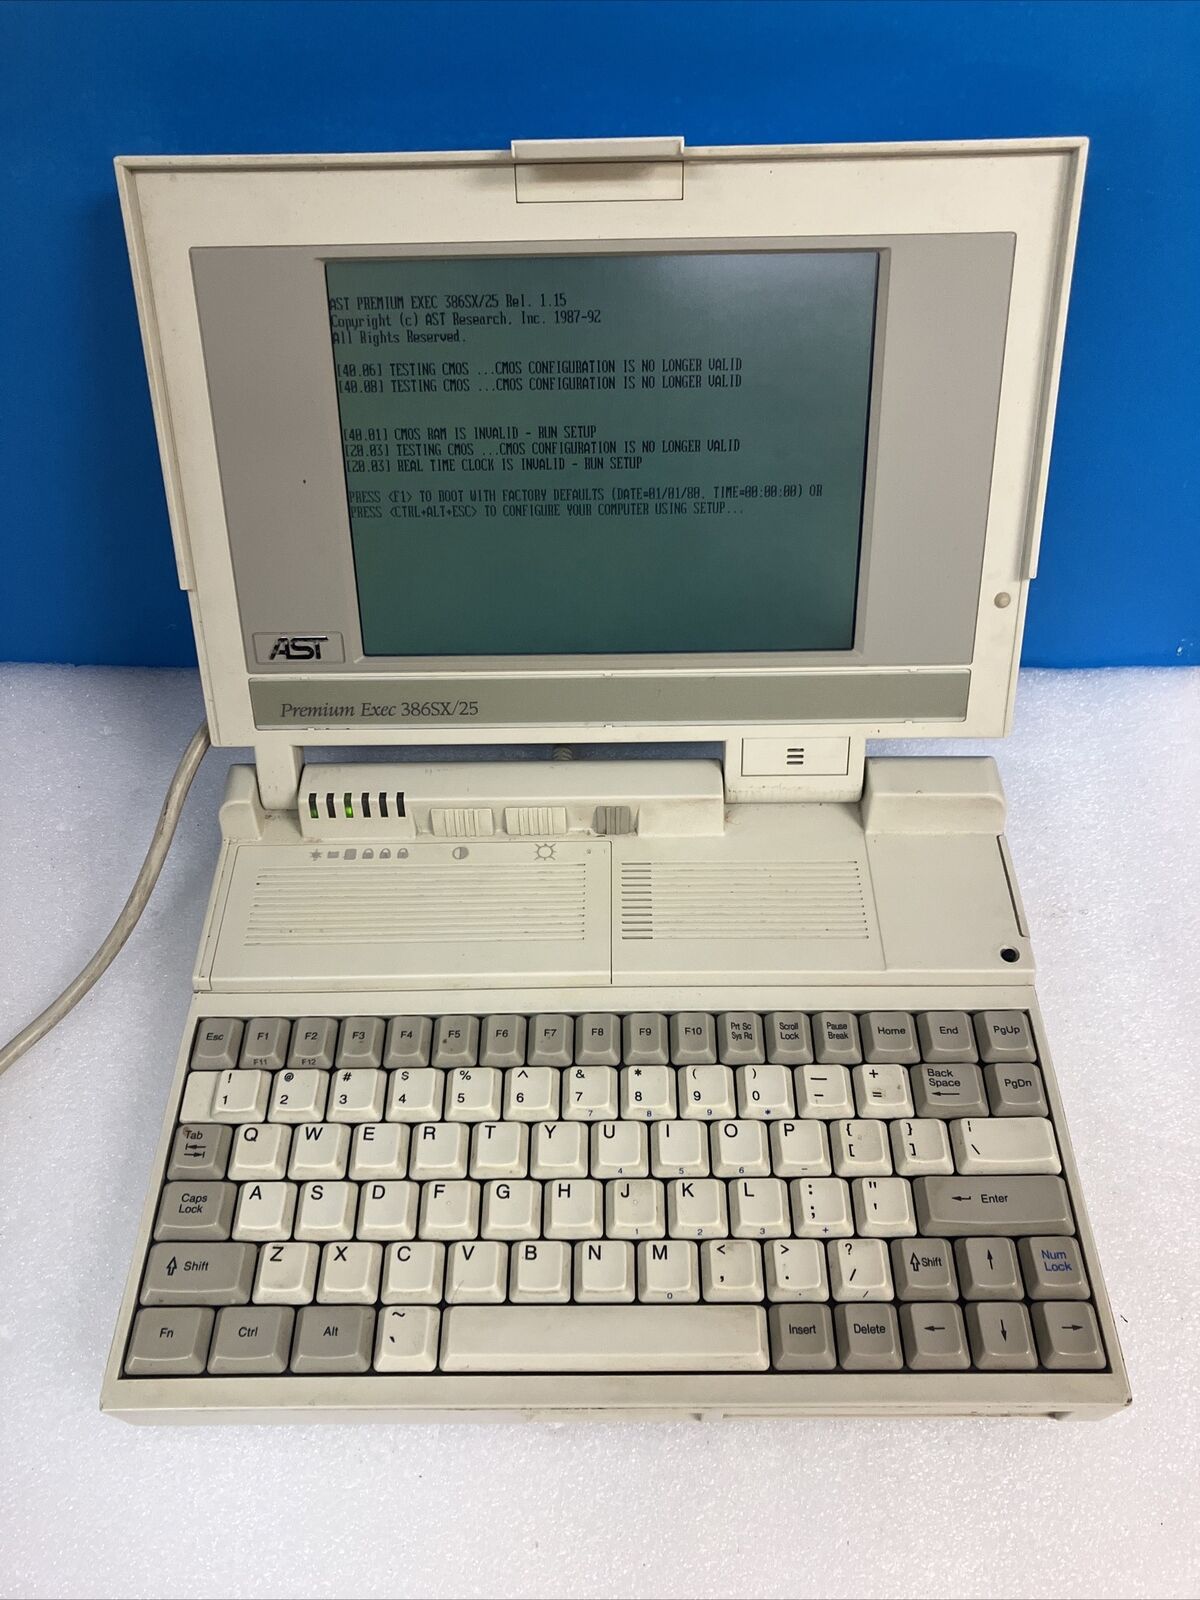 ~ Vintage AST Premium Exec 386SX/25 Laptop Computer With AC (Bad Battery, No OS)